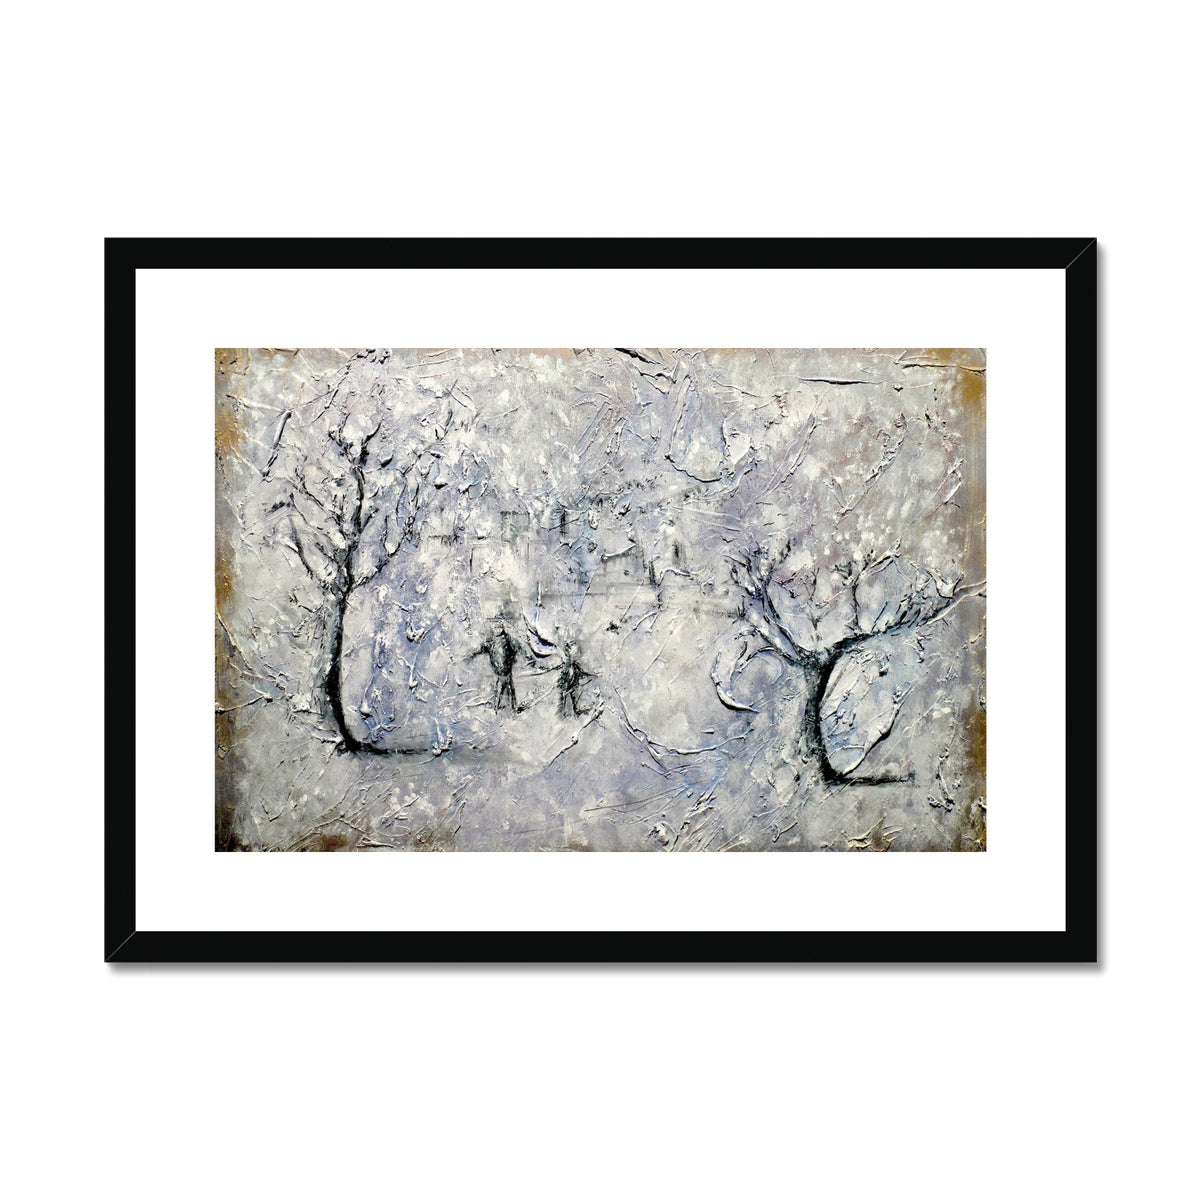 Father Daughter Snow Painting | Framed & Mounted Prints From Scotland-Framed & Mounted Prints-Abstract & Impressionistic Art Gallery-A2 Landscape-Black Frame-Paintings, Prints, Homeware, Art Gifts From Scotland By Scottish Artist Kevin Hunter